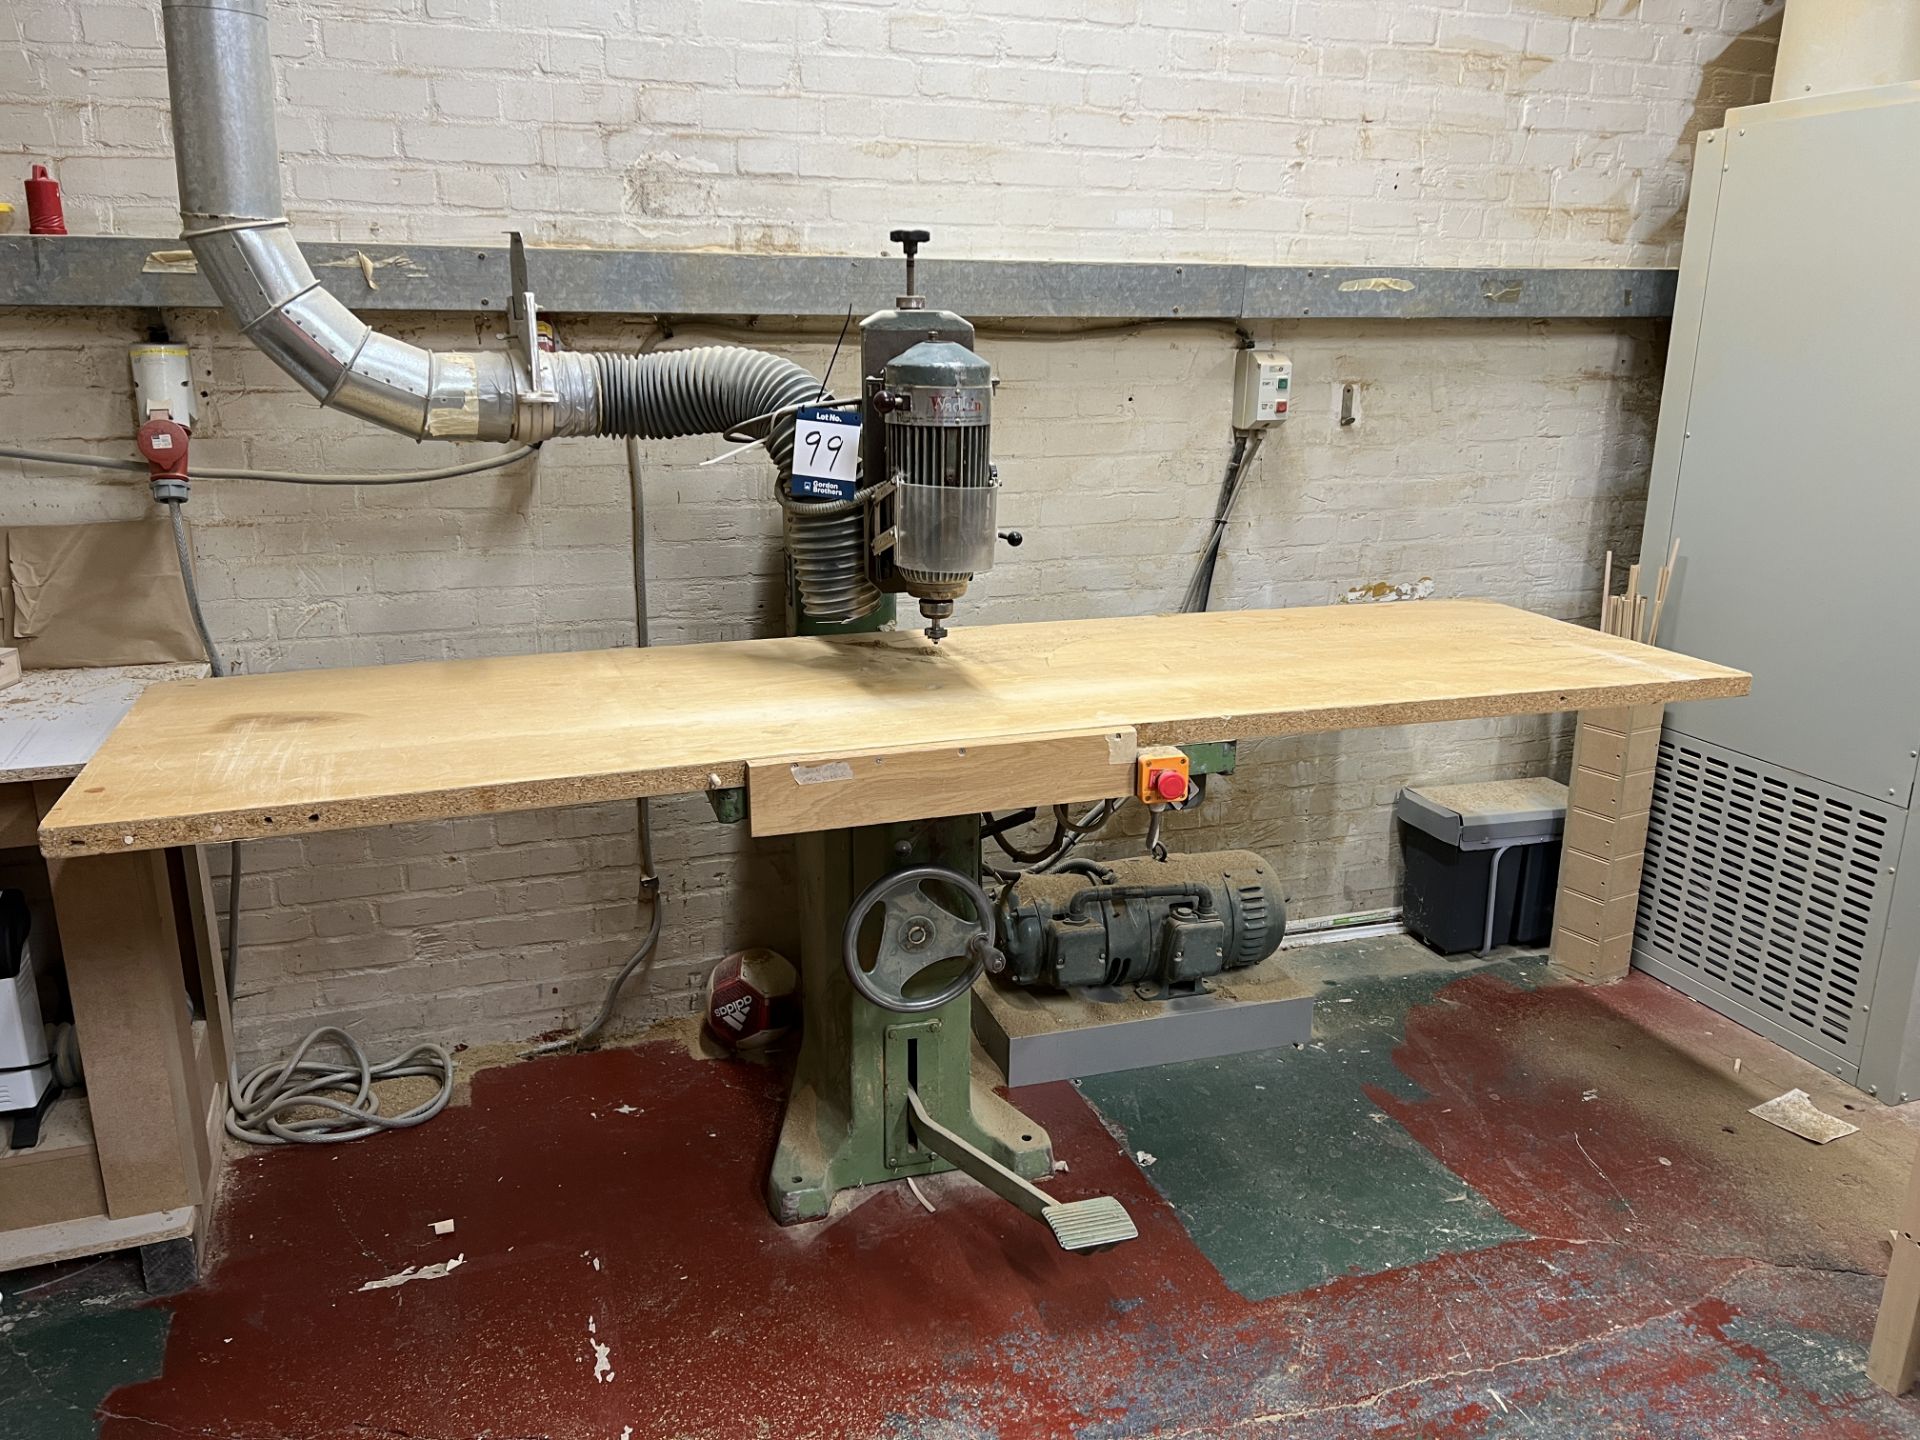 Wadkin UR162 overhead pin router with 900mm x 600mm usable table, 400 volts, S/No.UR 162, location